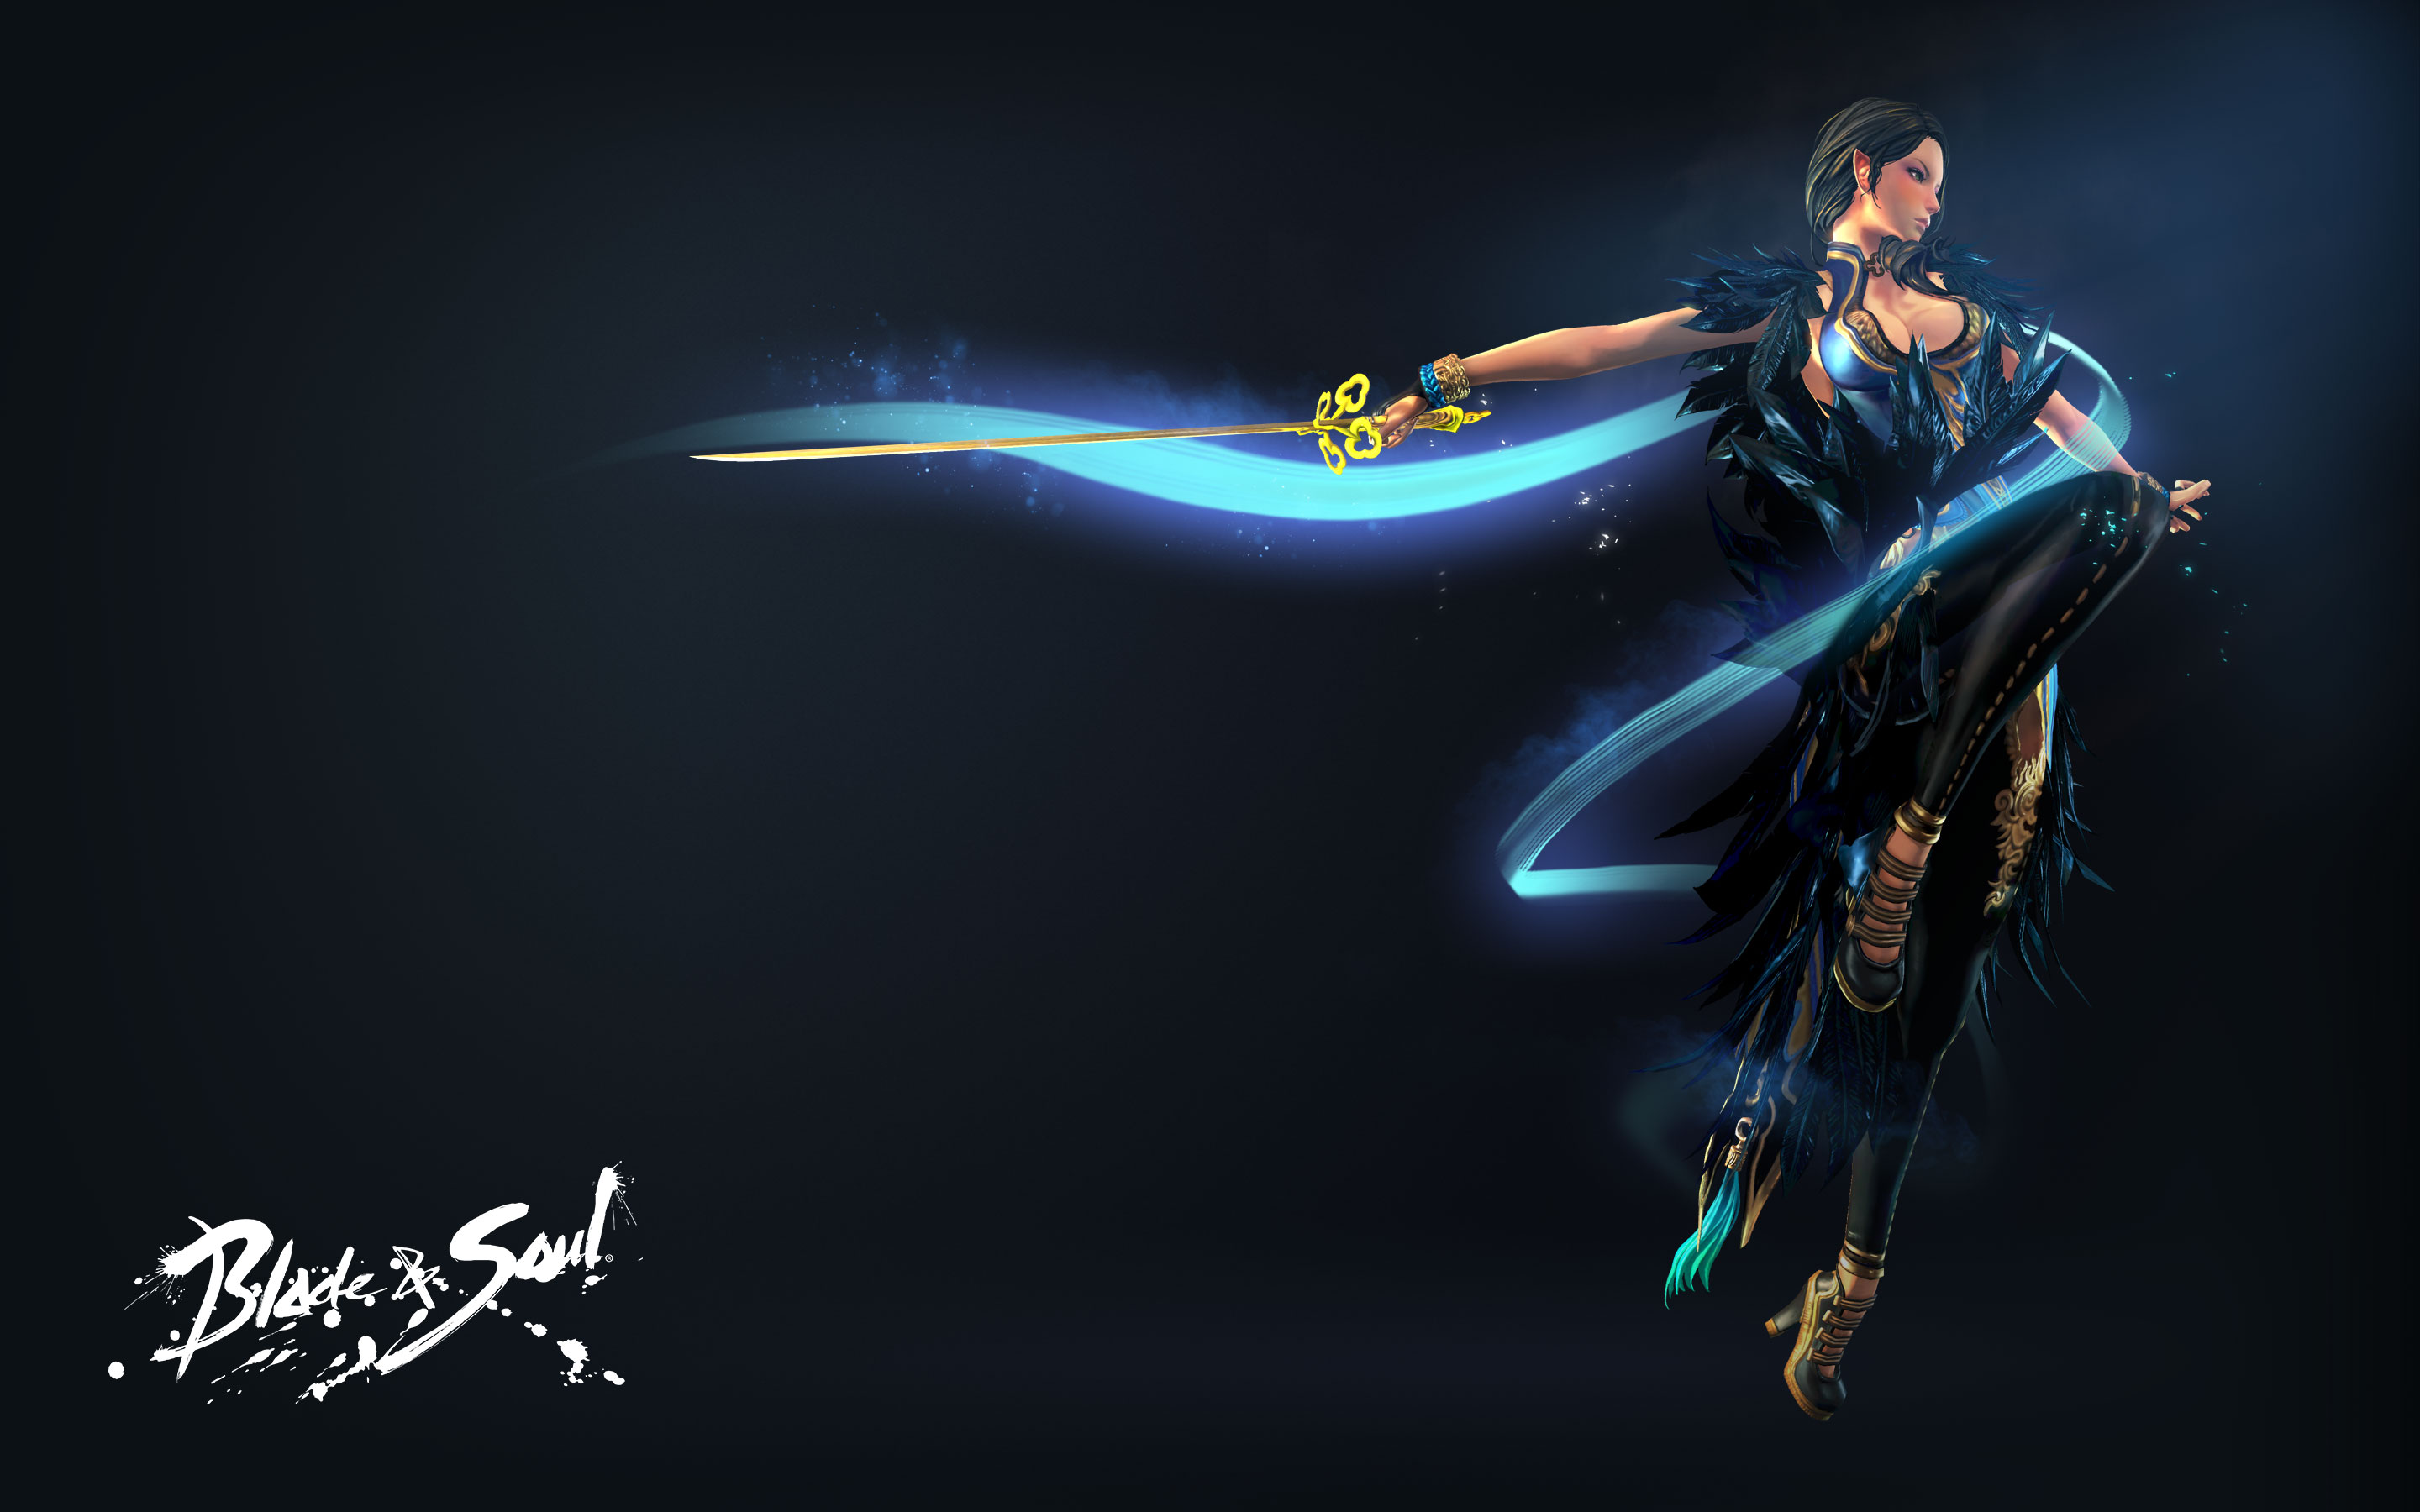 General 2880x1800 Blade & Soul bns fantasy girl sword video games women with swords video game girls women video game art video game characters